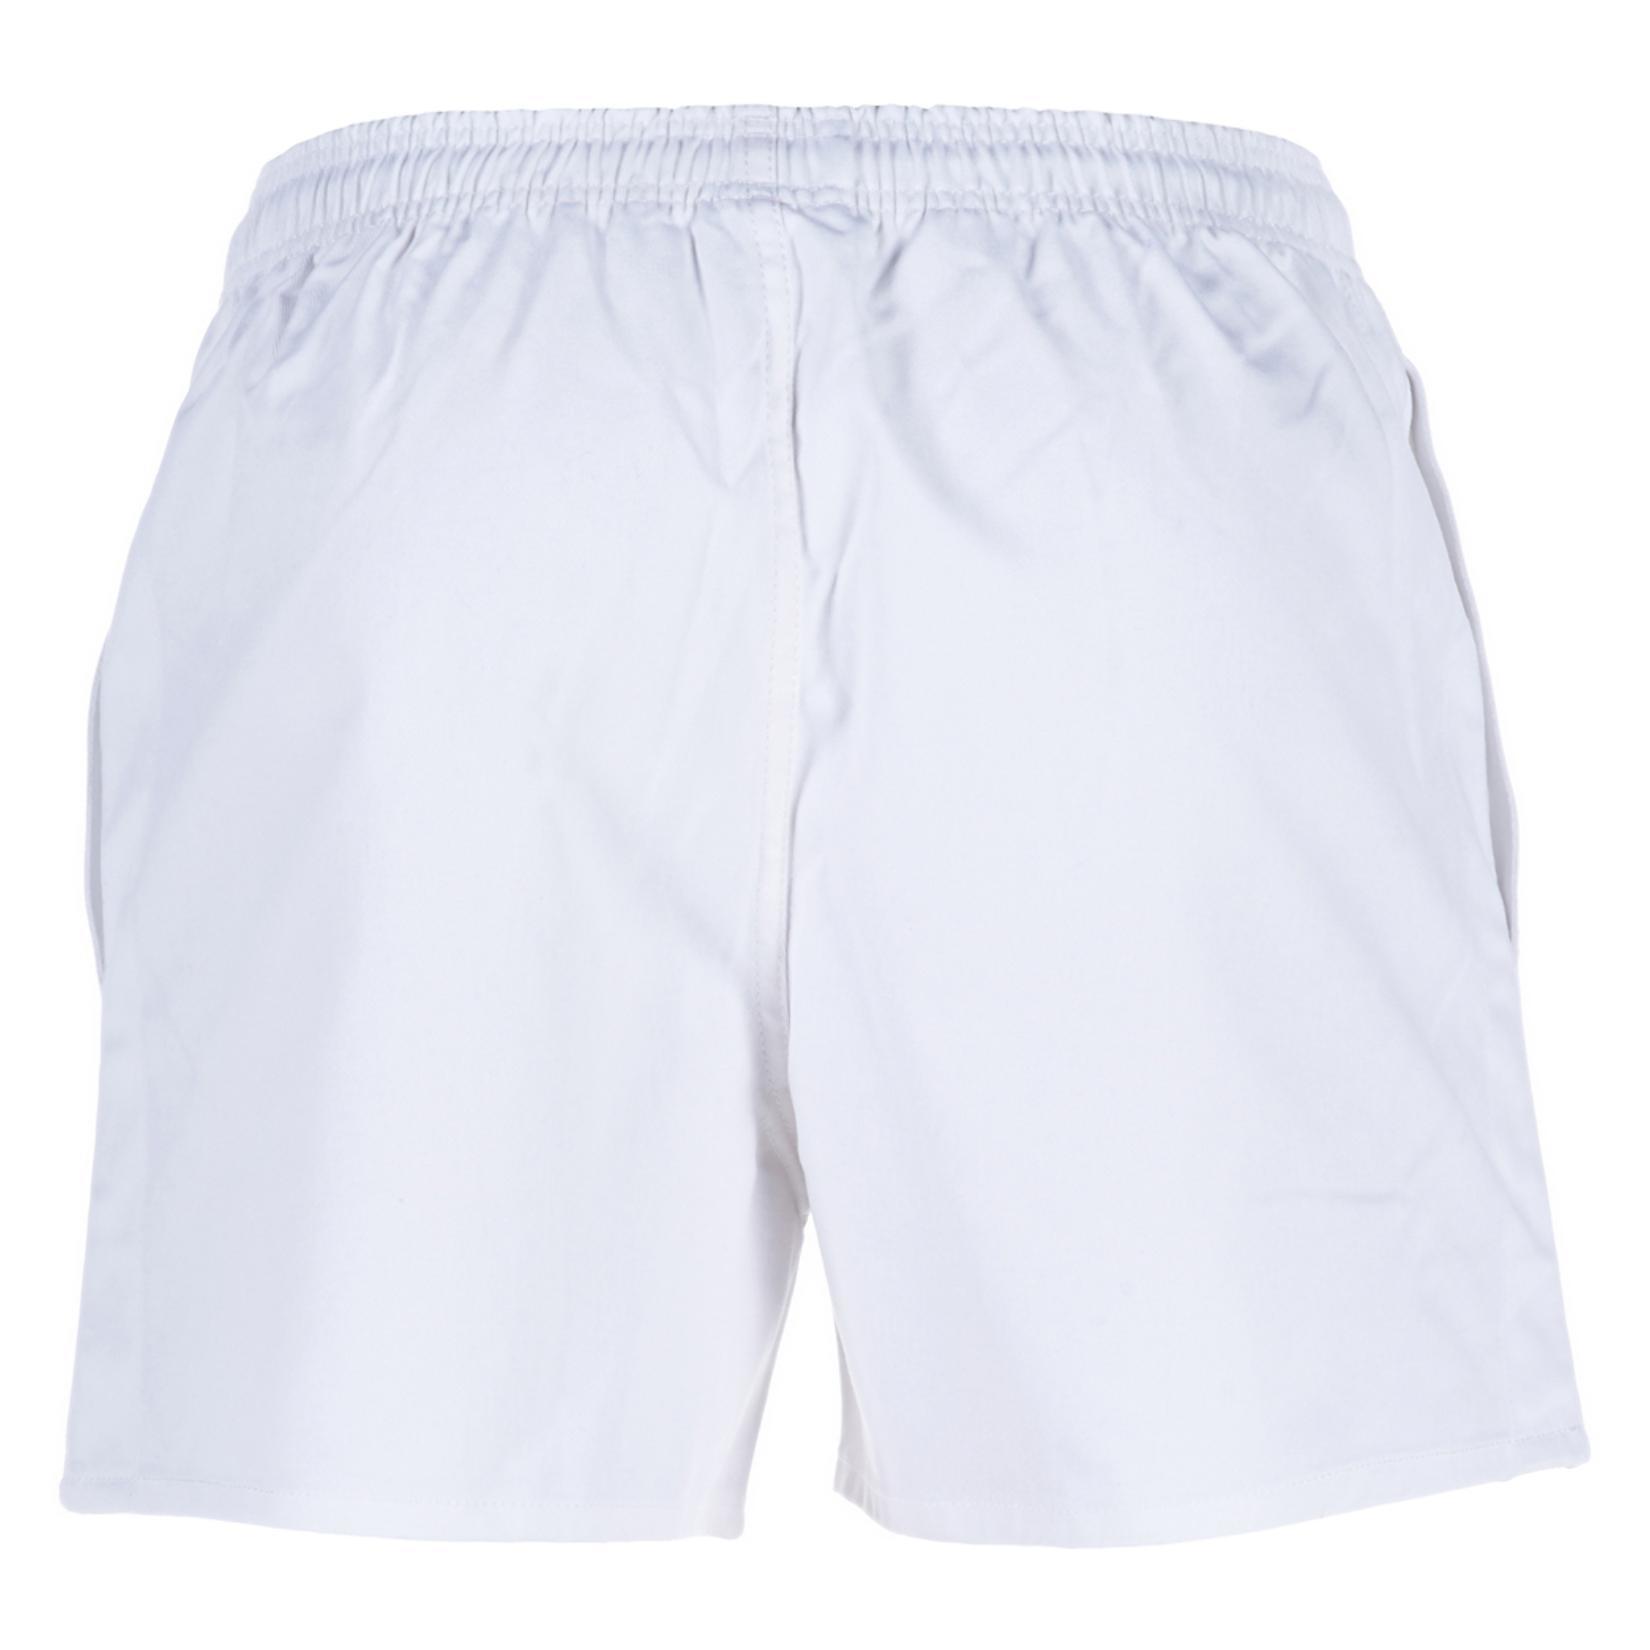 Mens Professional Cotton Rugby Shorts (White) 2/3